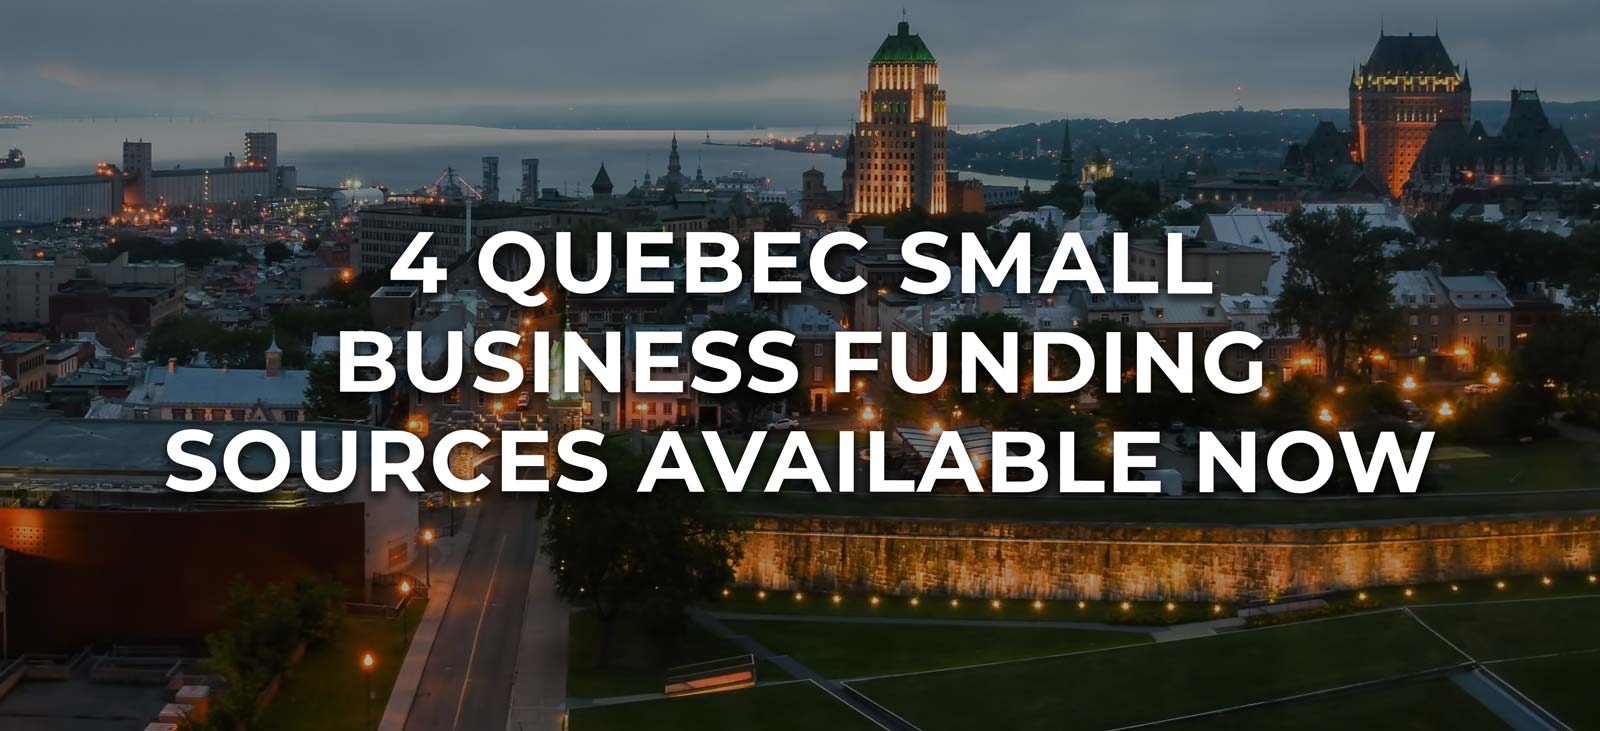 Quebec small business funding sources